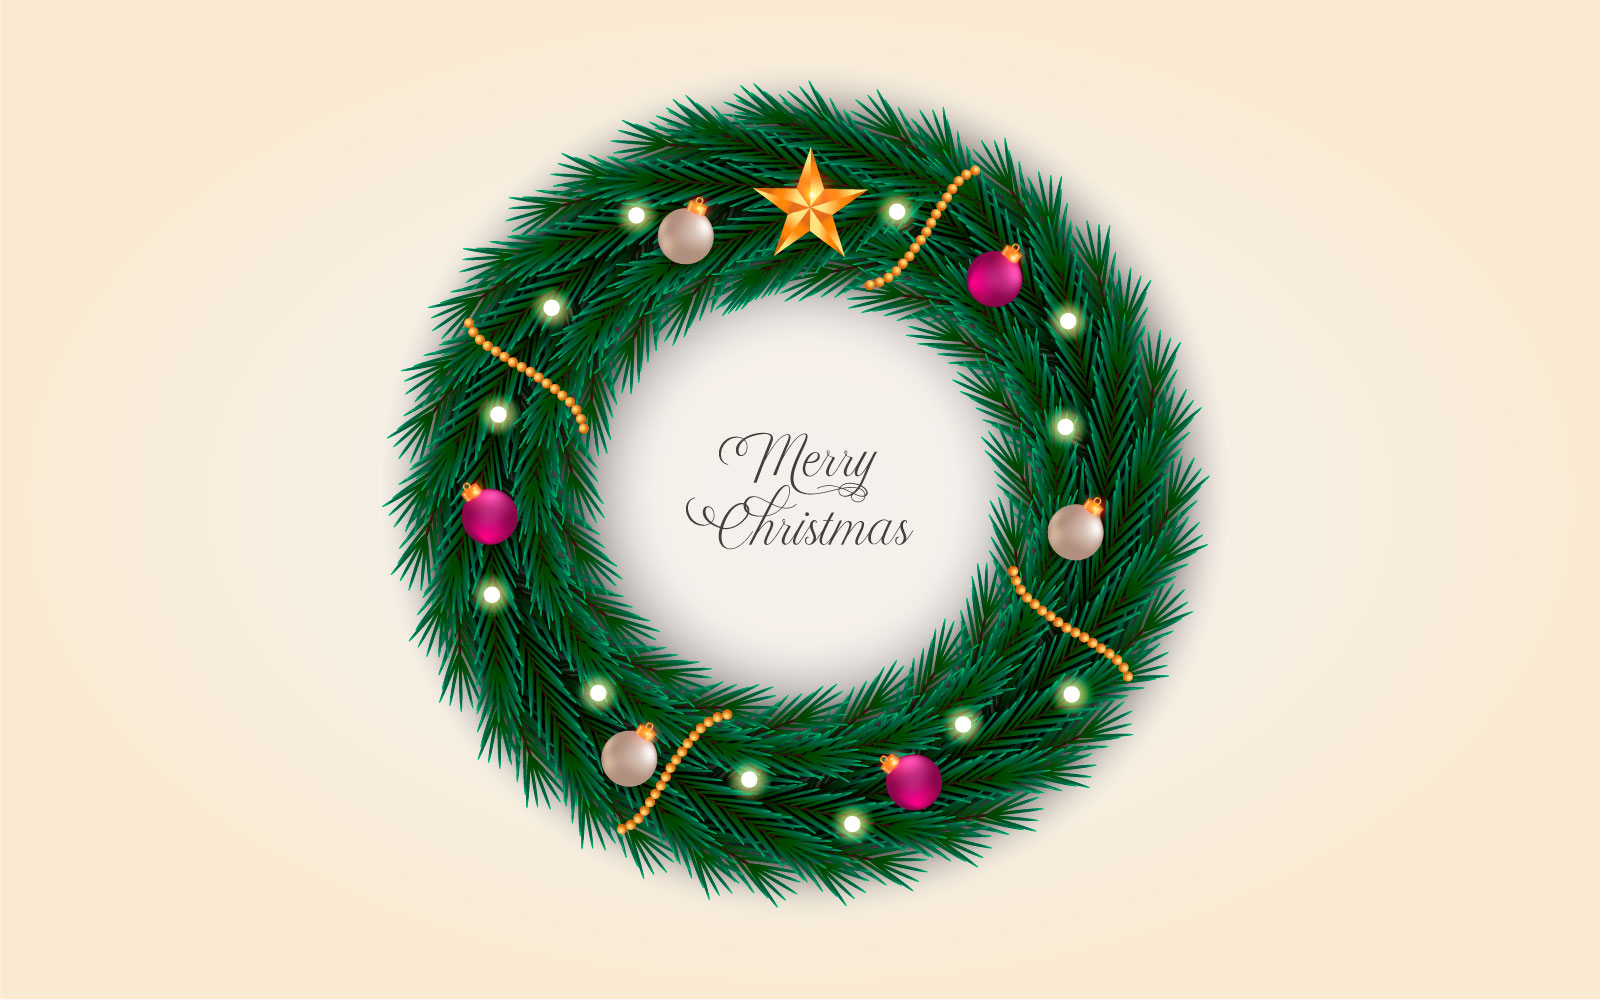 Best christmas wishes wreath with decorated holiday wreath  vector illustration